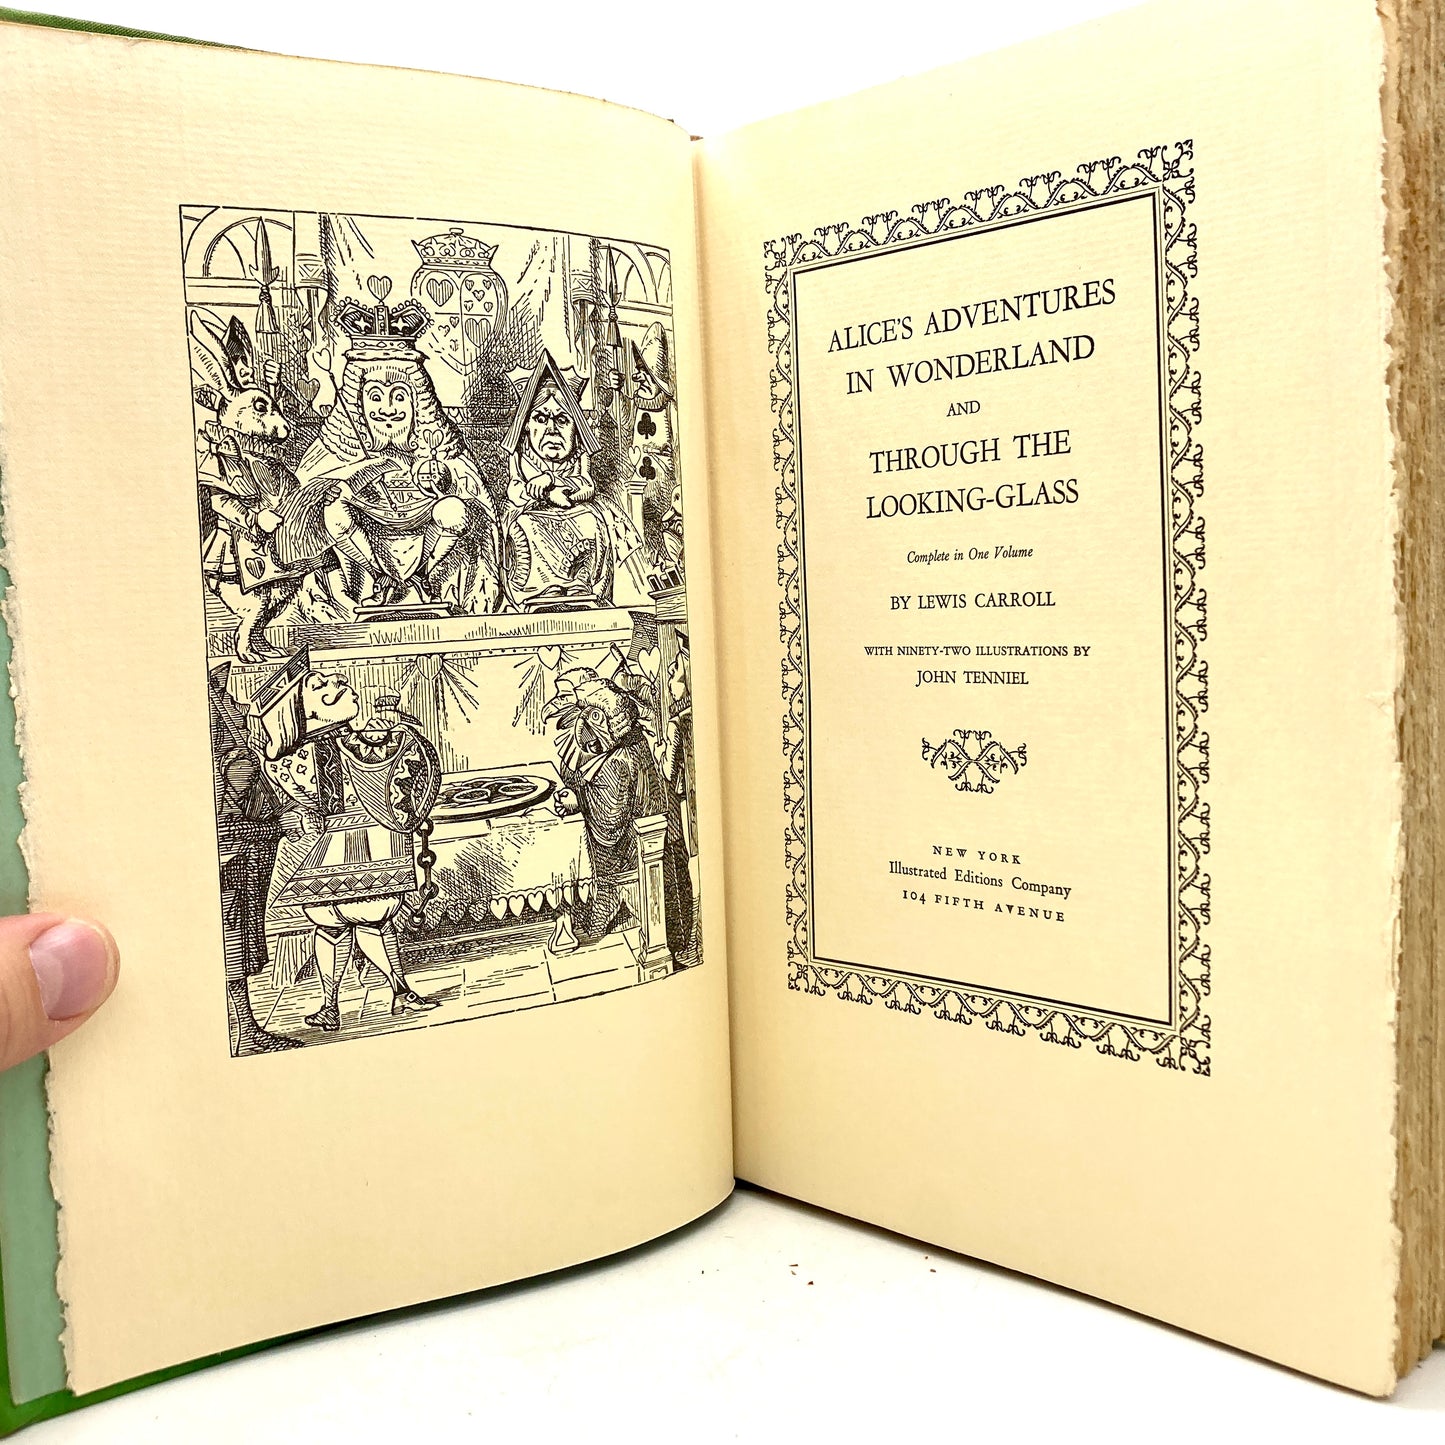 CARROLL, Lewis "Alice's Adventures in Wonderland" [Illustrated Editions Co, c1930s] - Buzz Bookstore